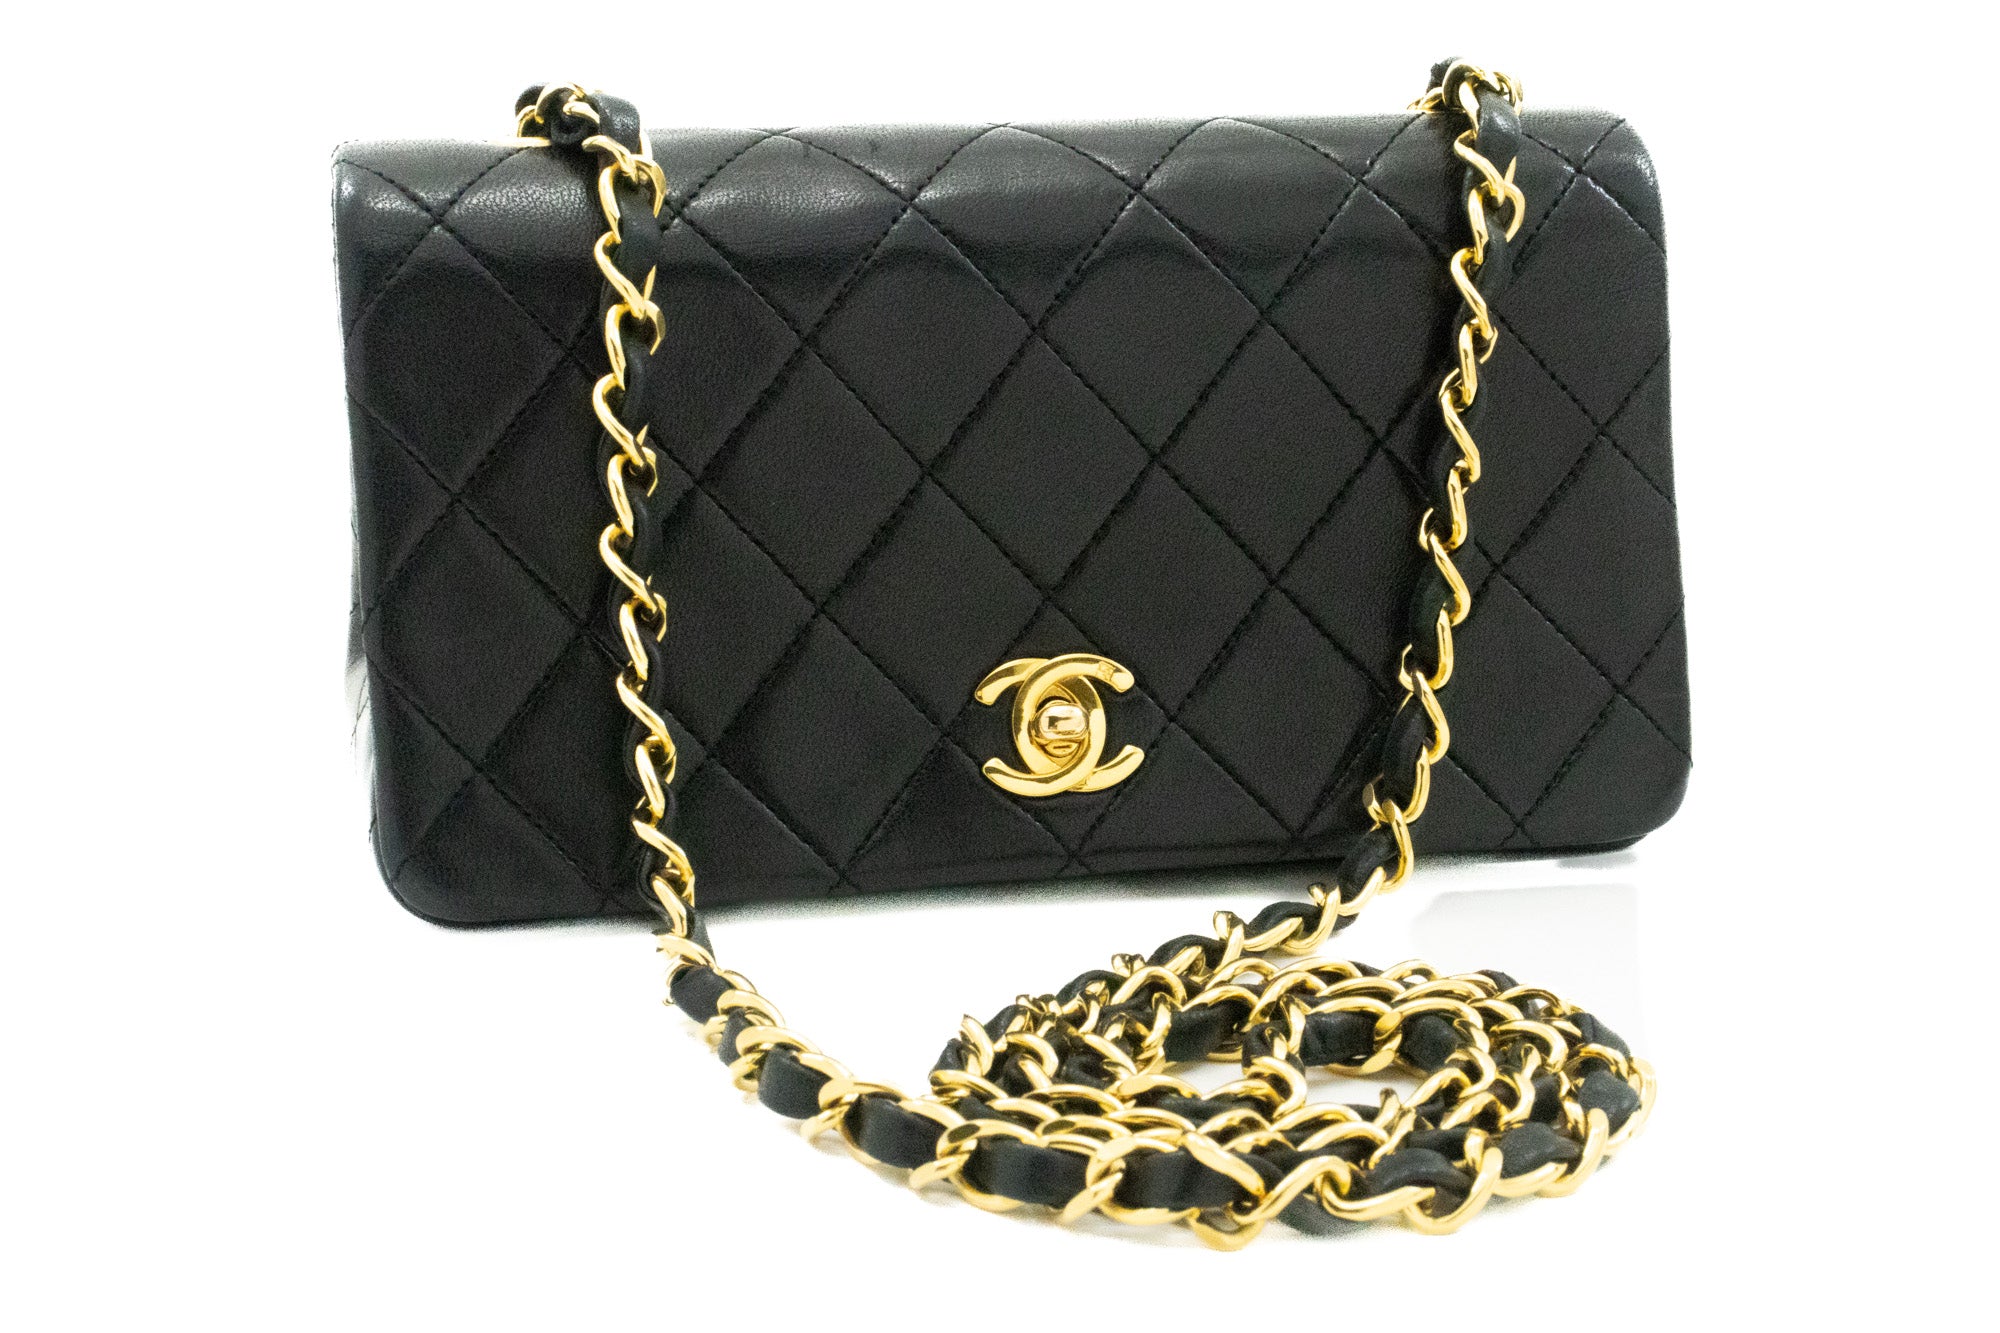 Chanel Quilted Black Purse